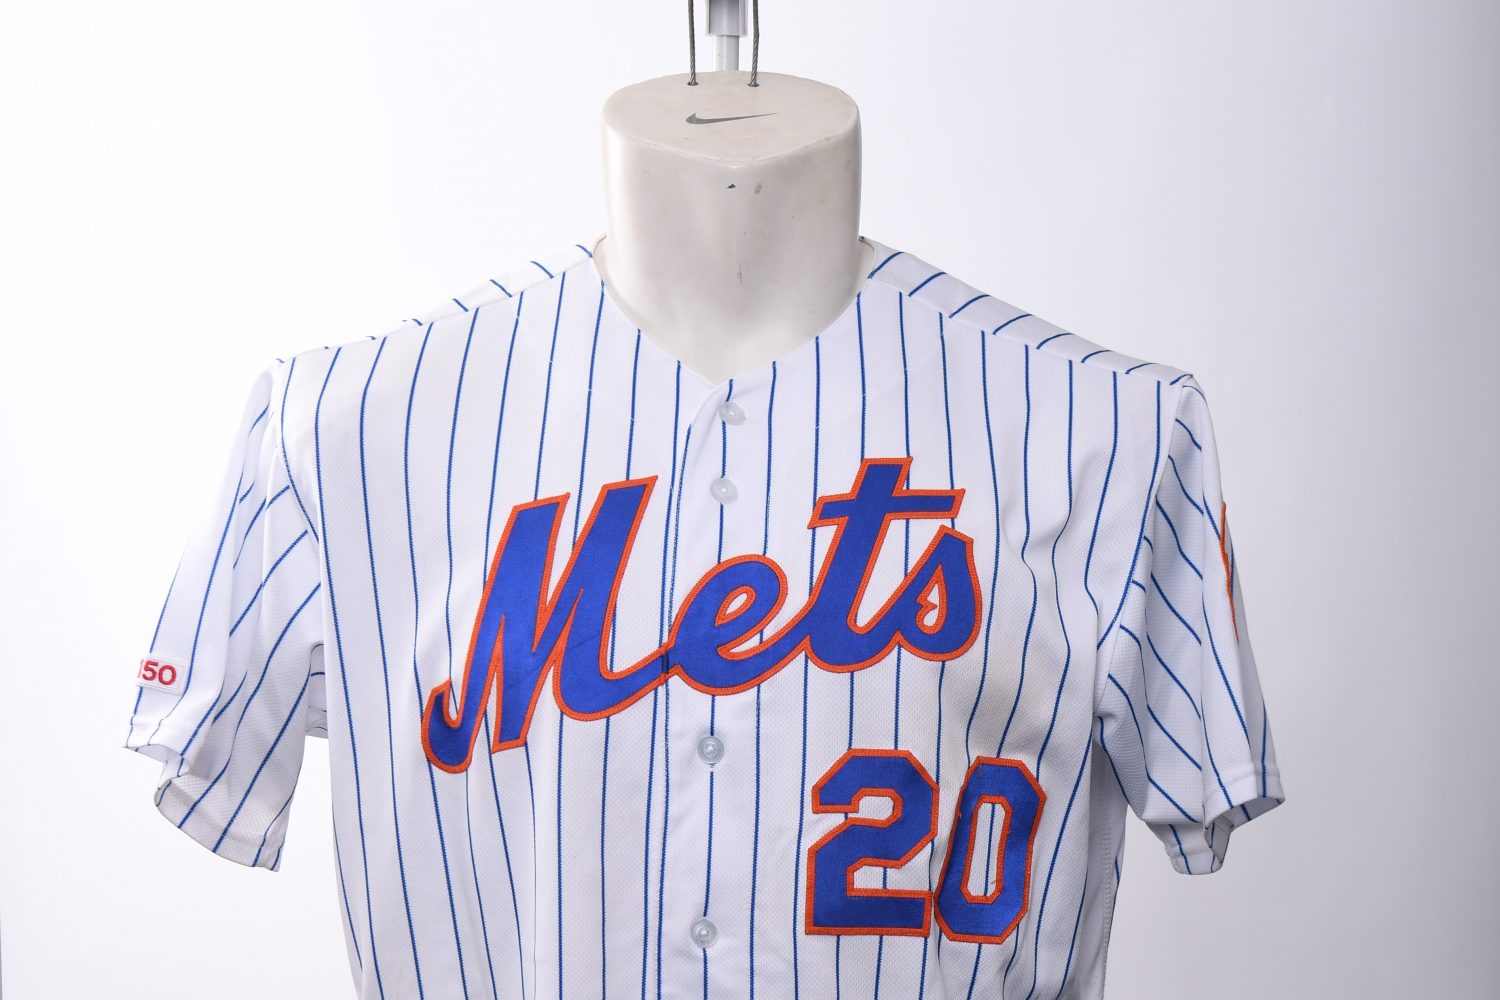 Pet Alonso Game-Worn Jersey from Home Run no. 42